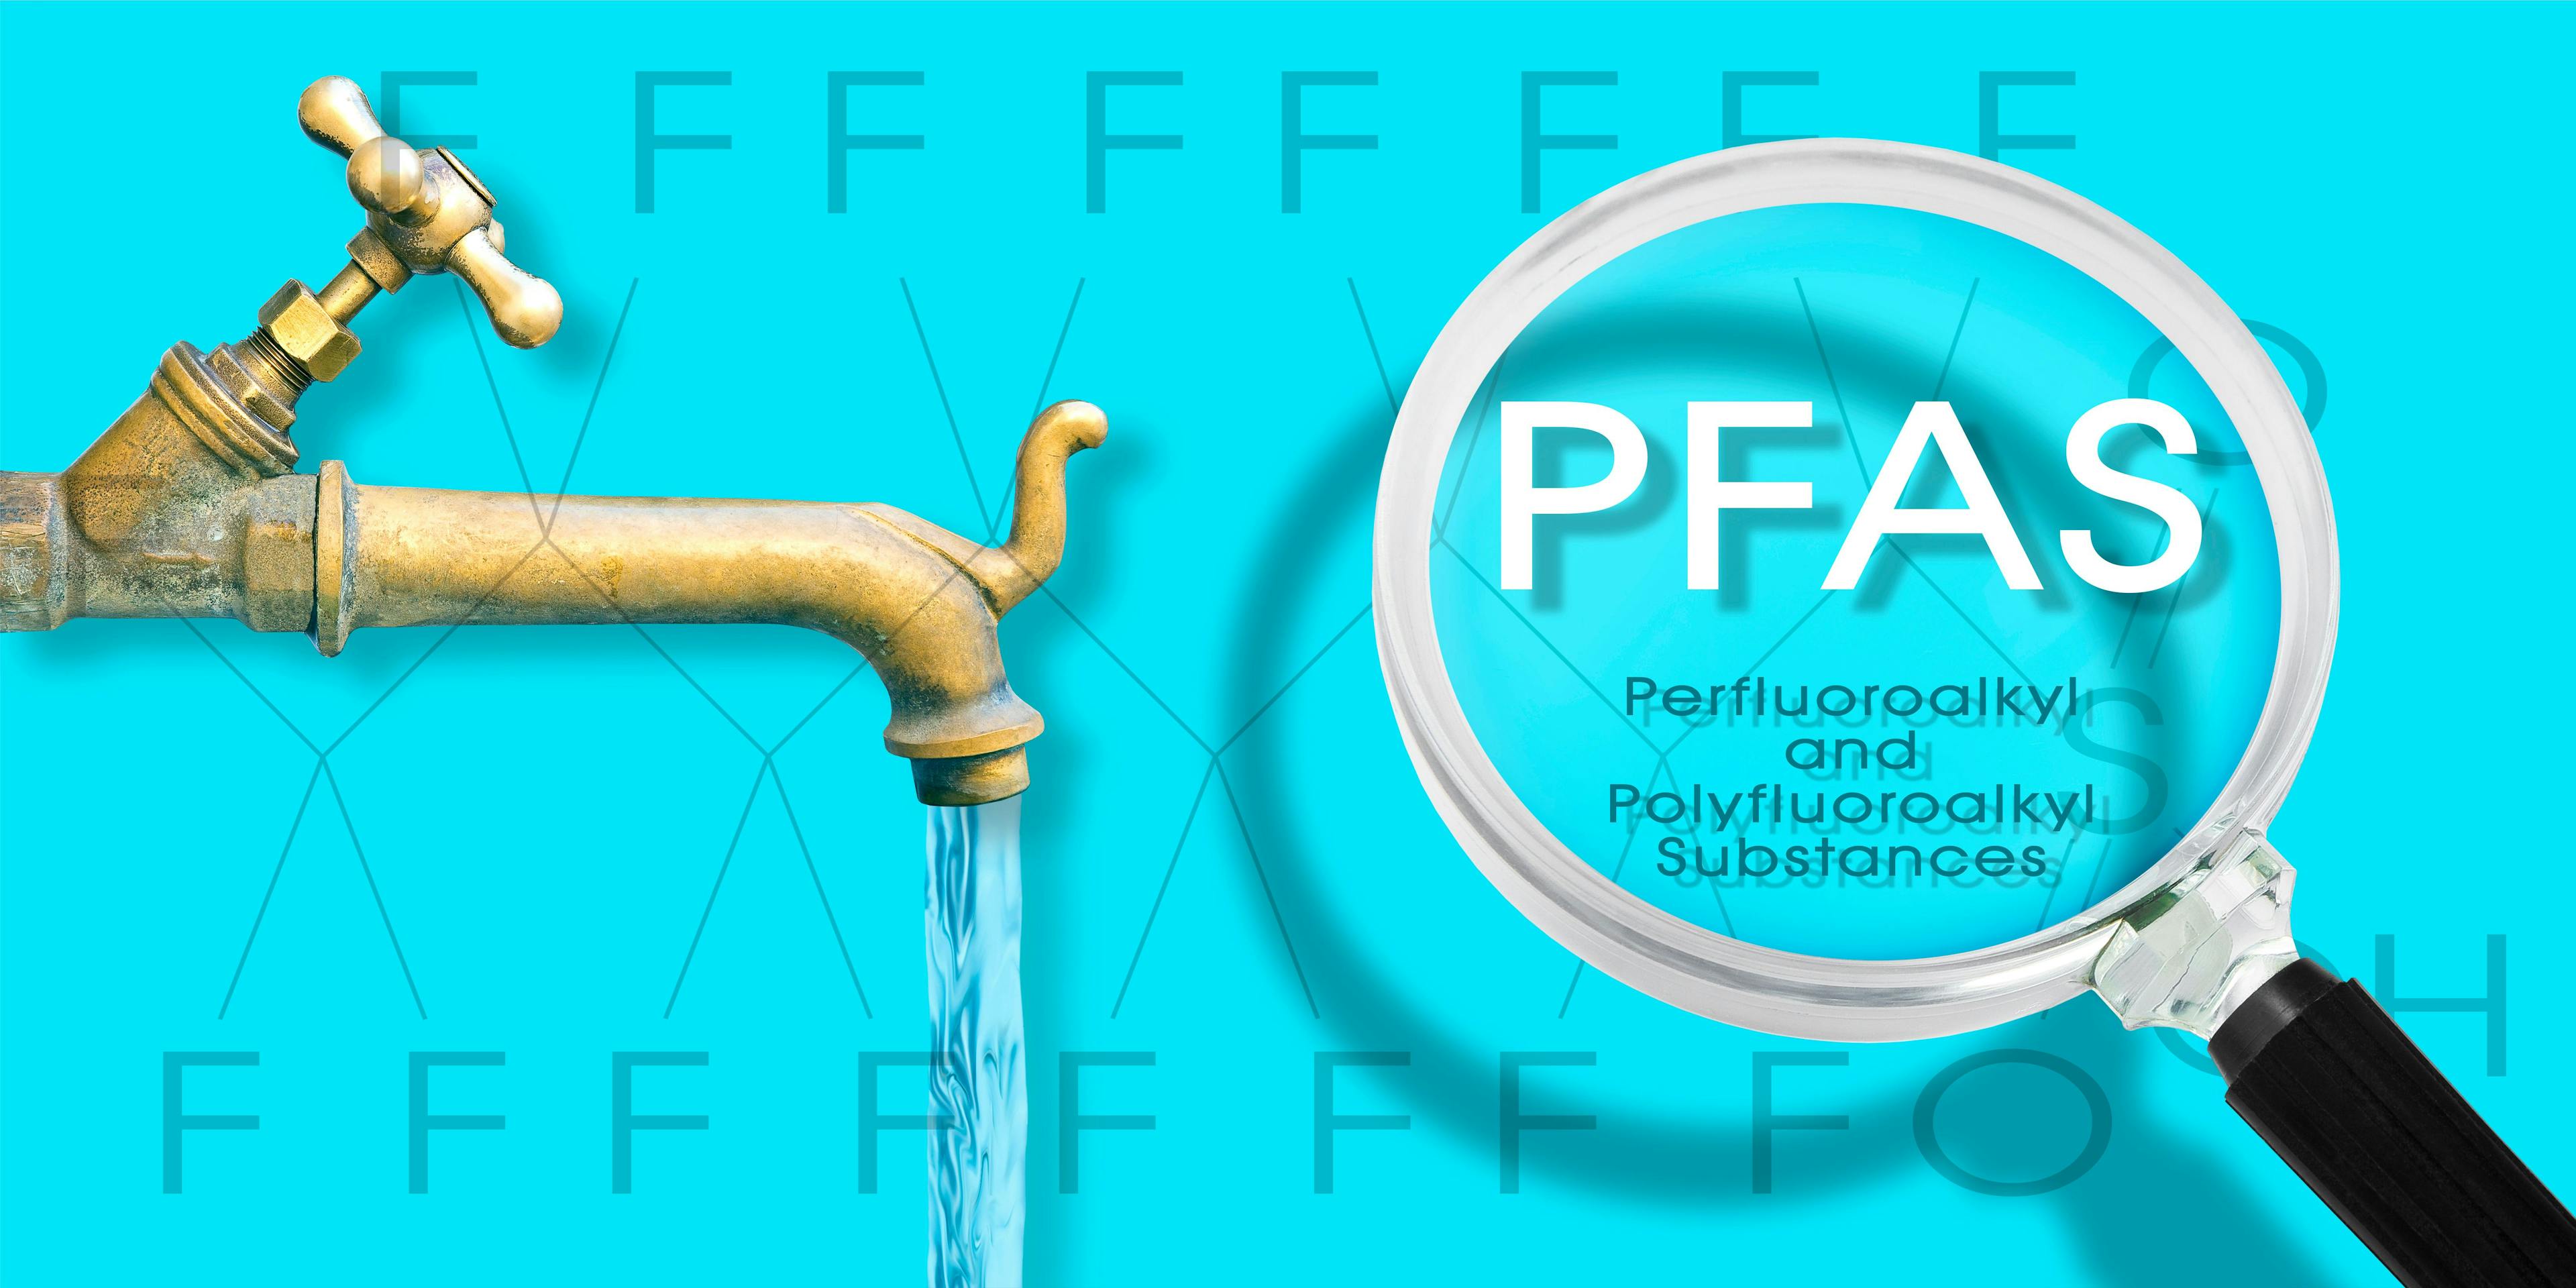 PFAS Contamination of Drinking Water - Alertness about dangerous PFAS per-and polyfluoroalkyl substances presence in potable water - Concept with magnifying glass | Image Credit: © Francesco Scatena - stock.adobe.com